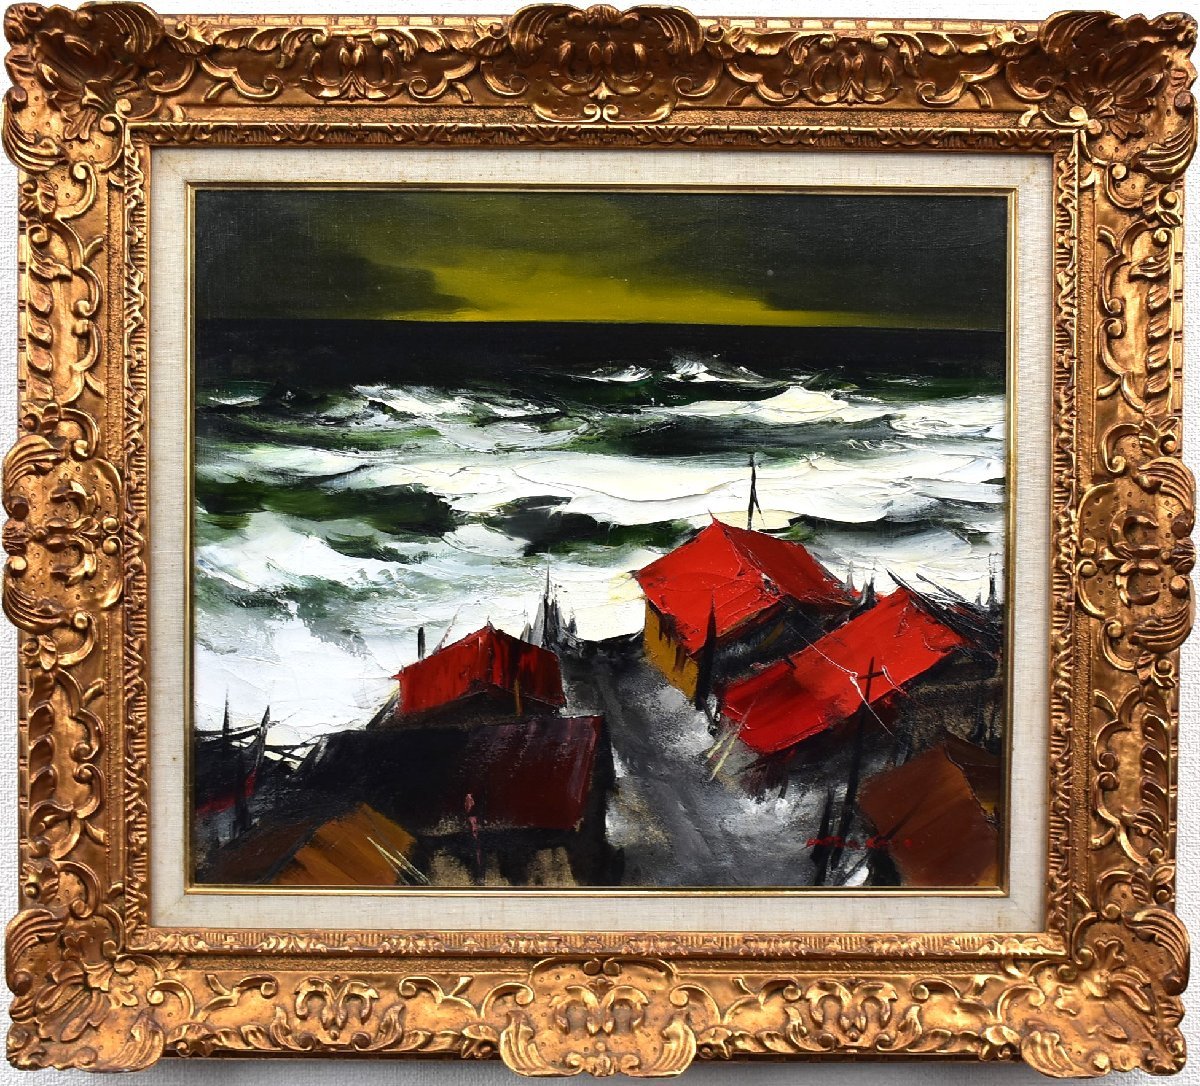 popular work that depicts the harshness of nature in a northern fishing village with unique colors! Kasai Shiyu 10-go Northern Sea Oil Painting [Masami Gallery, 5, 500 pieces on display]*, Painting, Oil painting, Nature, Landscape painting